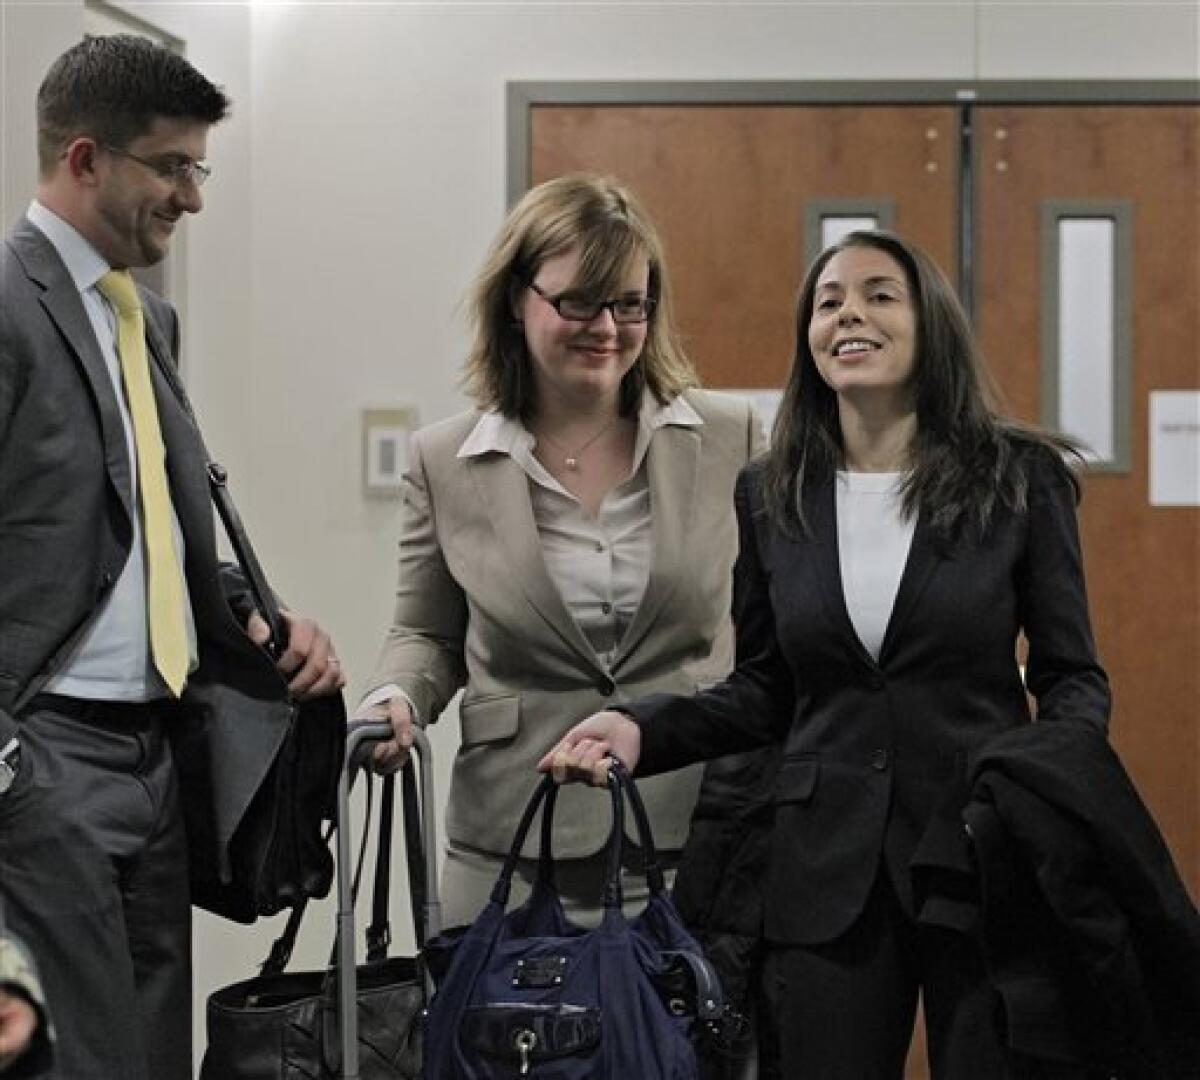 Fox reporter Jana Winter, right, and her attorneys arrive for a hearing for Aurora theater shooting suspect James E. Holmes in Centennial, Colo., where defense attorneys want her to divulge her sources.